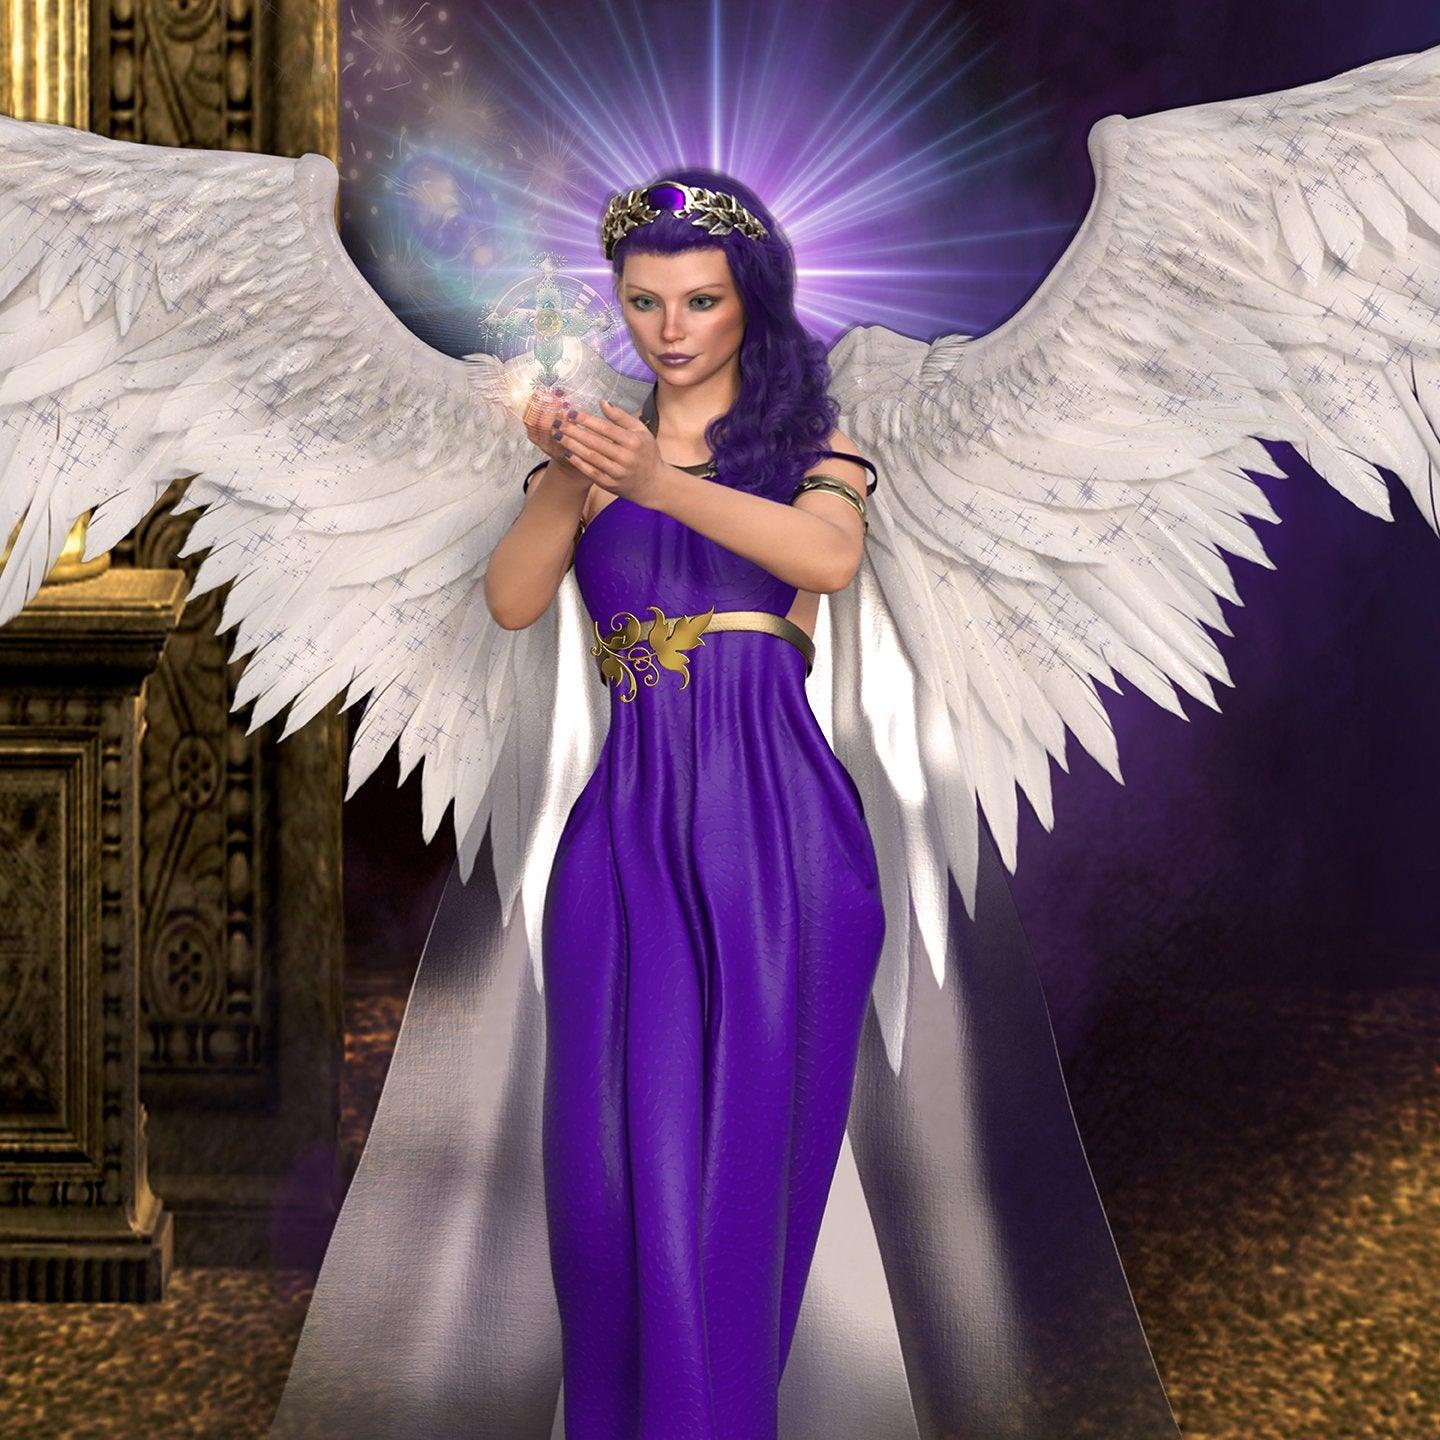 More Than Charms Angel of Belief The Angel of Belief reminds us to have faith, trust in the mystery so that you can move forward on your path. When we have belief and trust in a Higher Power, we have faith that things are as they should be. At this presen